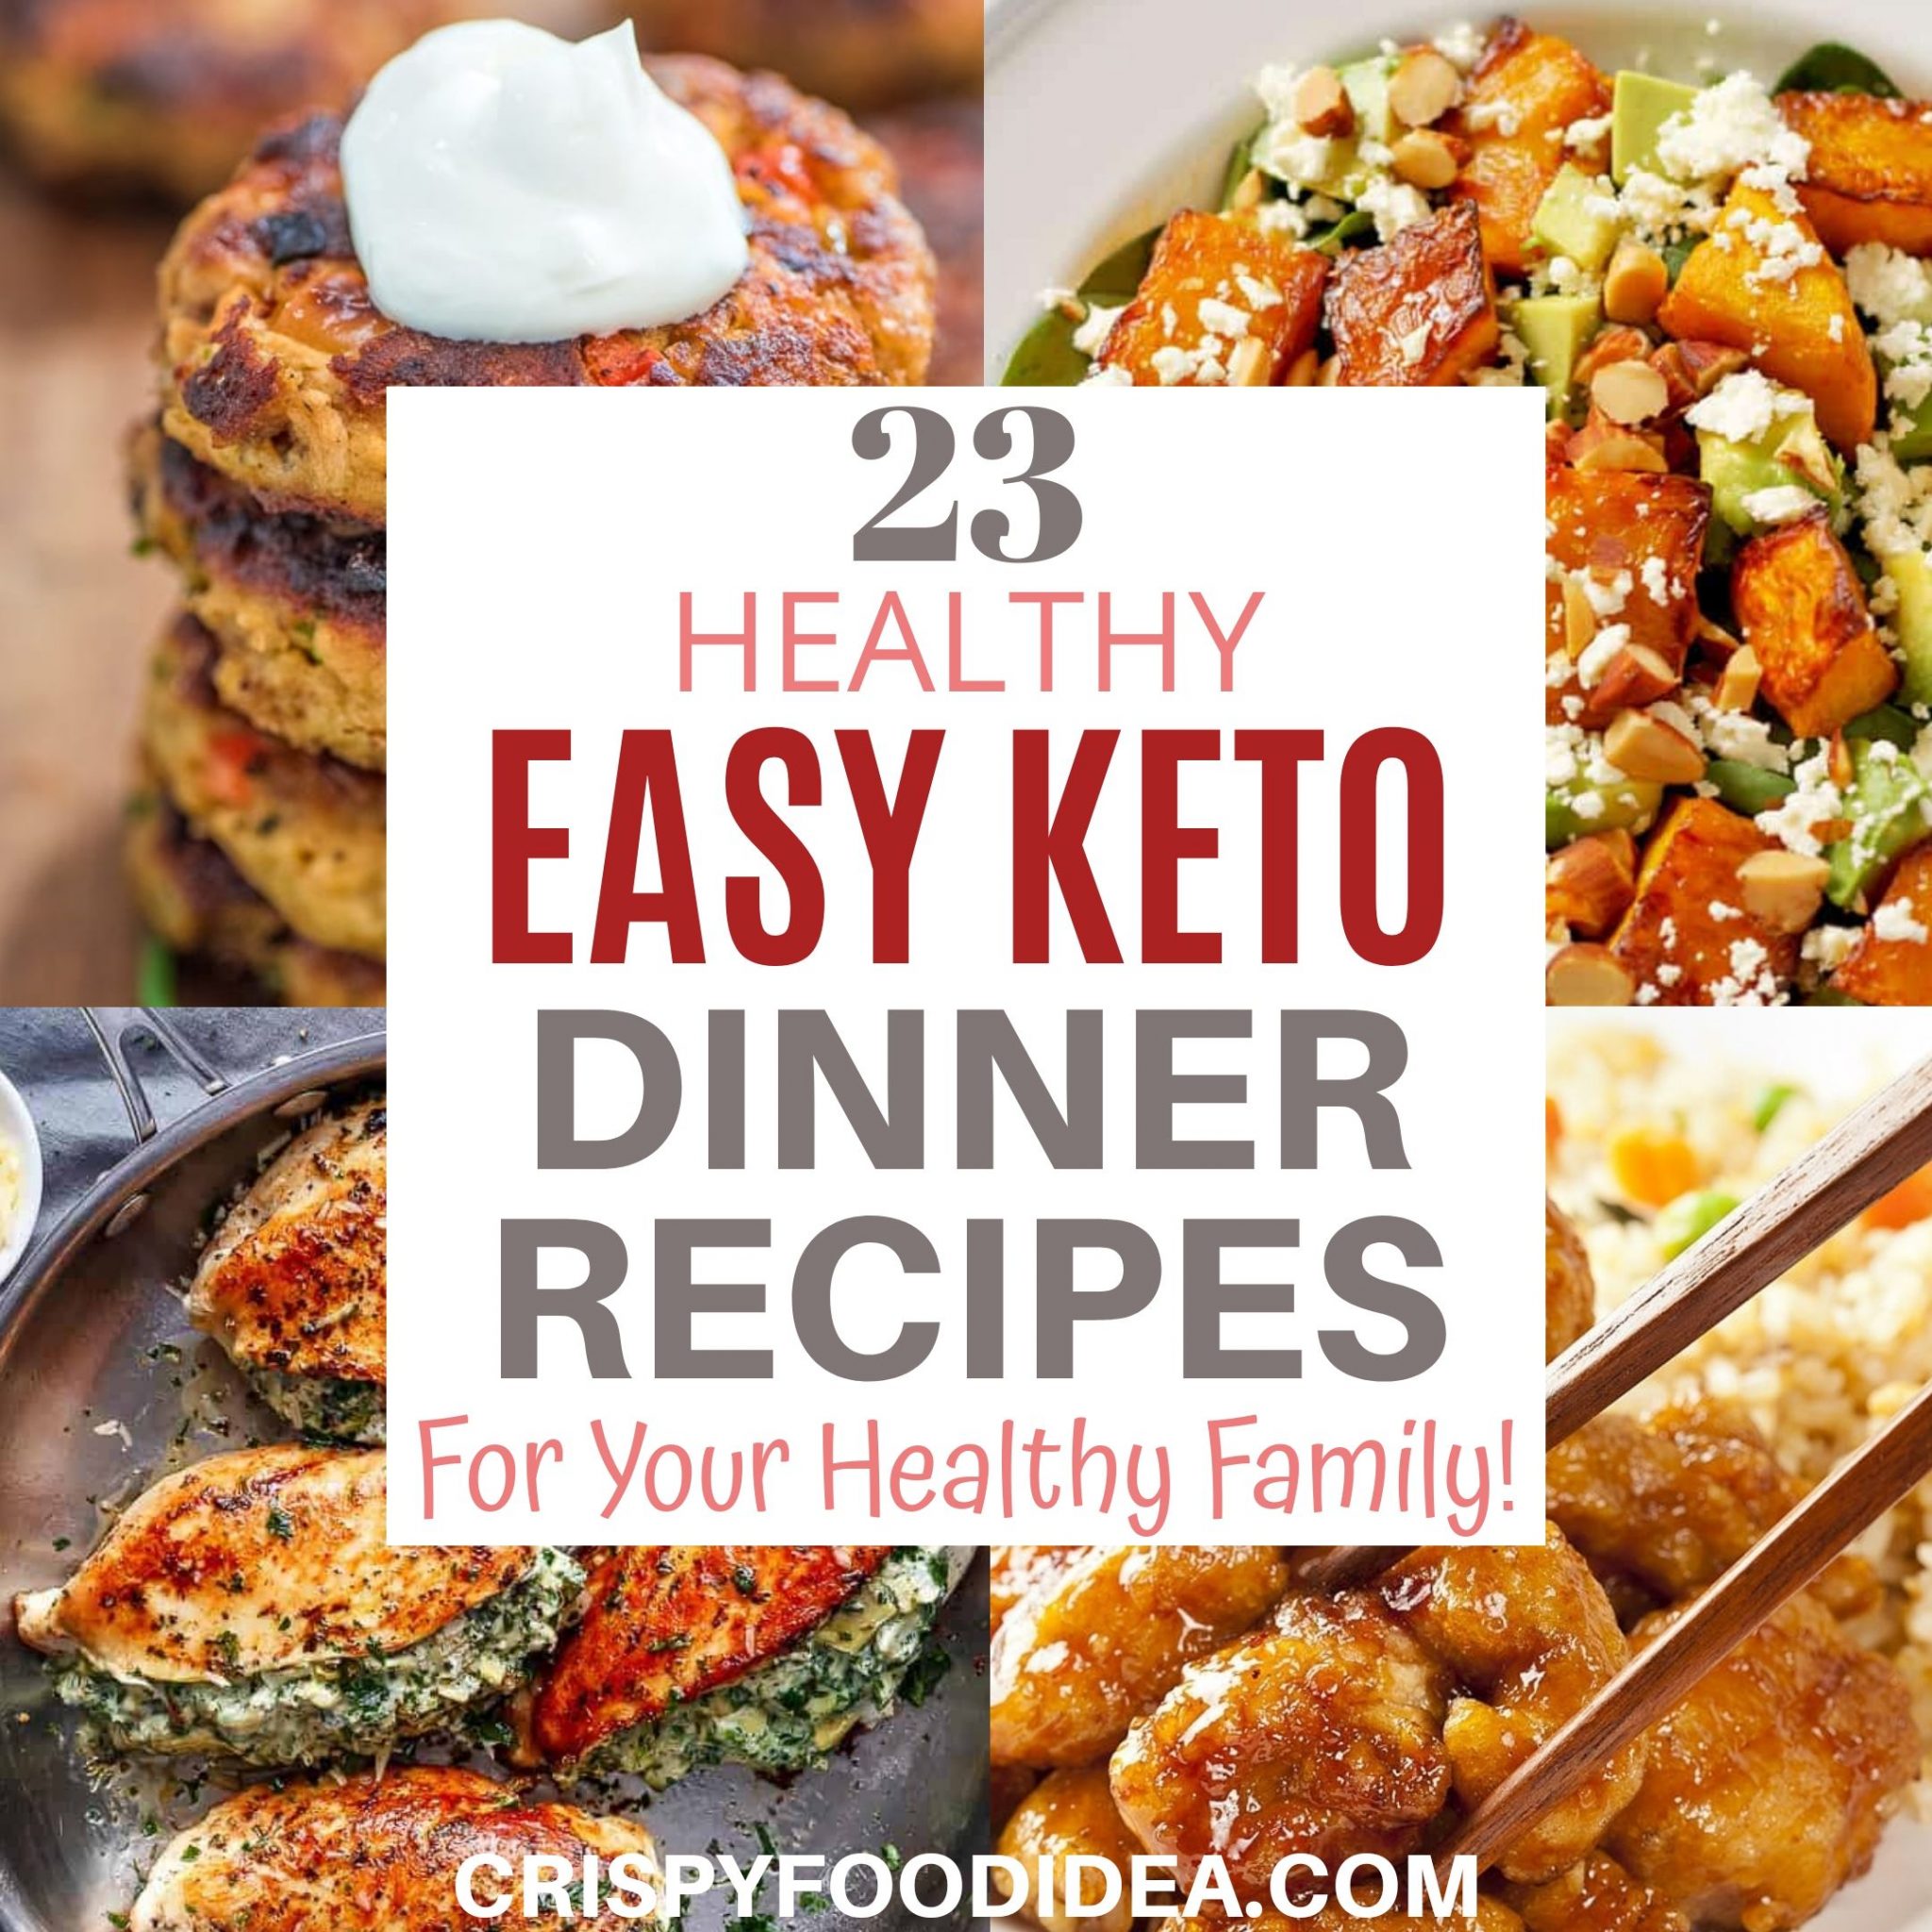 Healthy Easy Keto Dinner Recipes to Lose Weight Fast